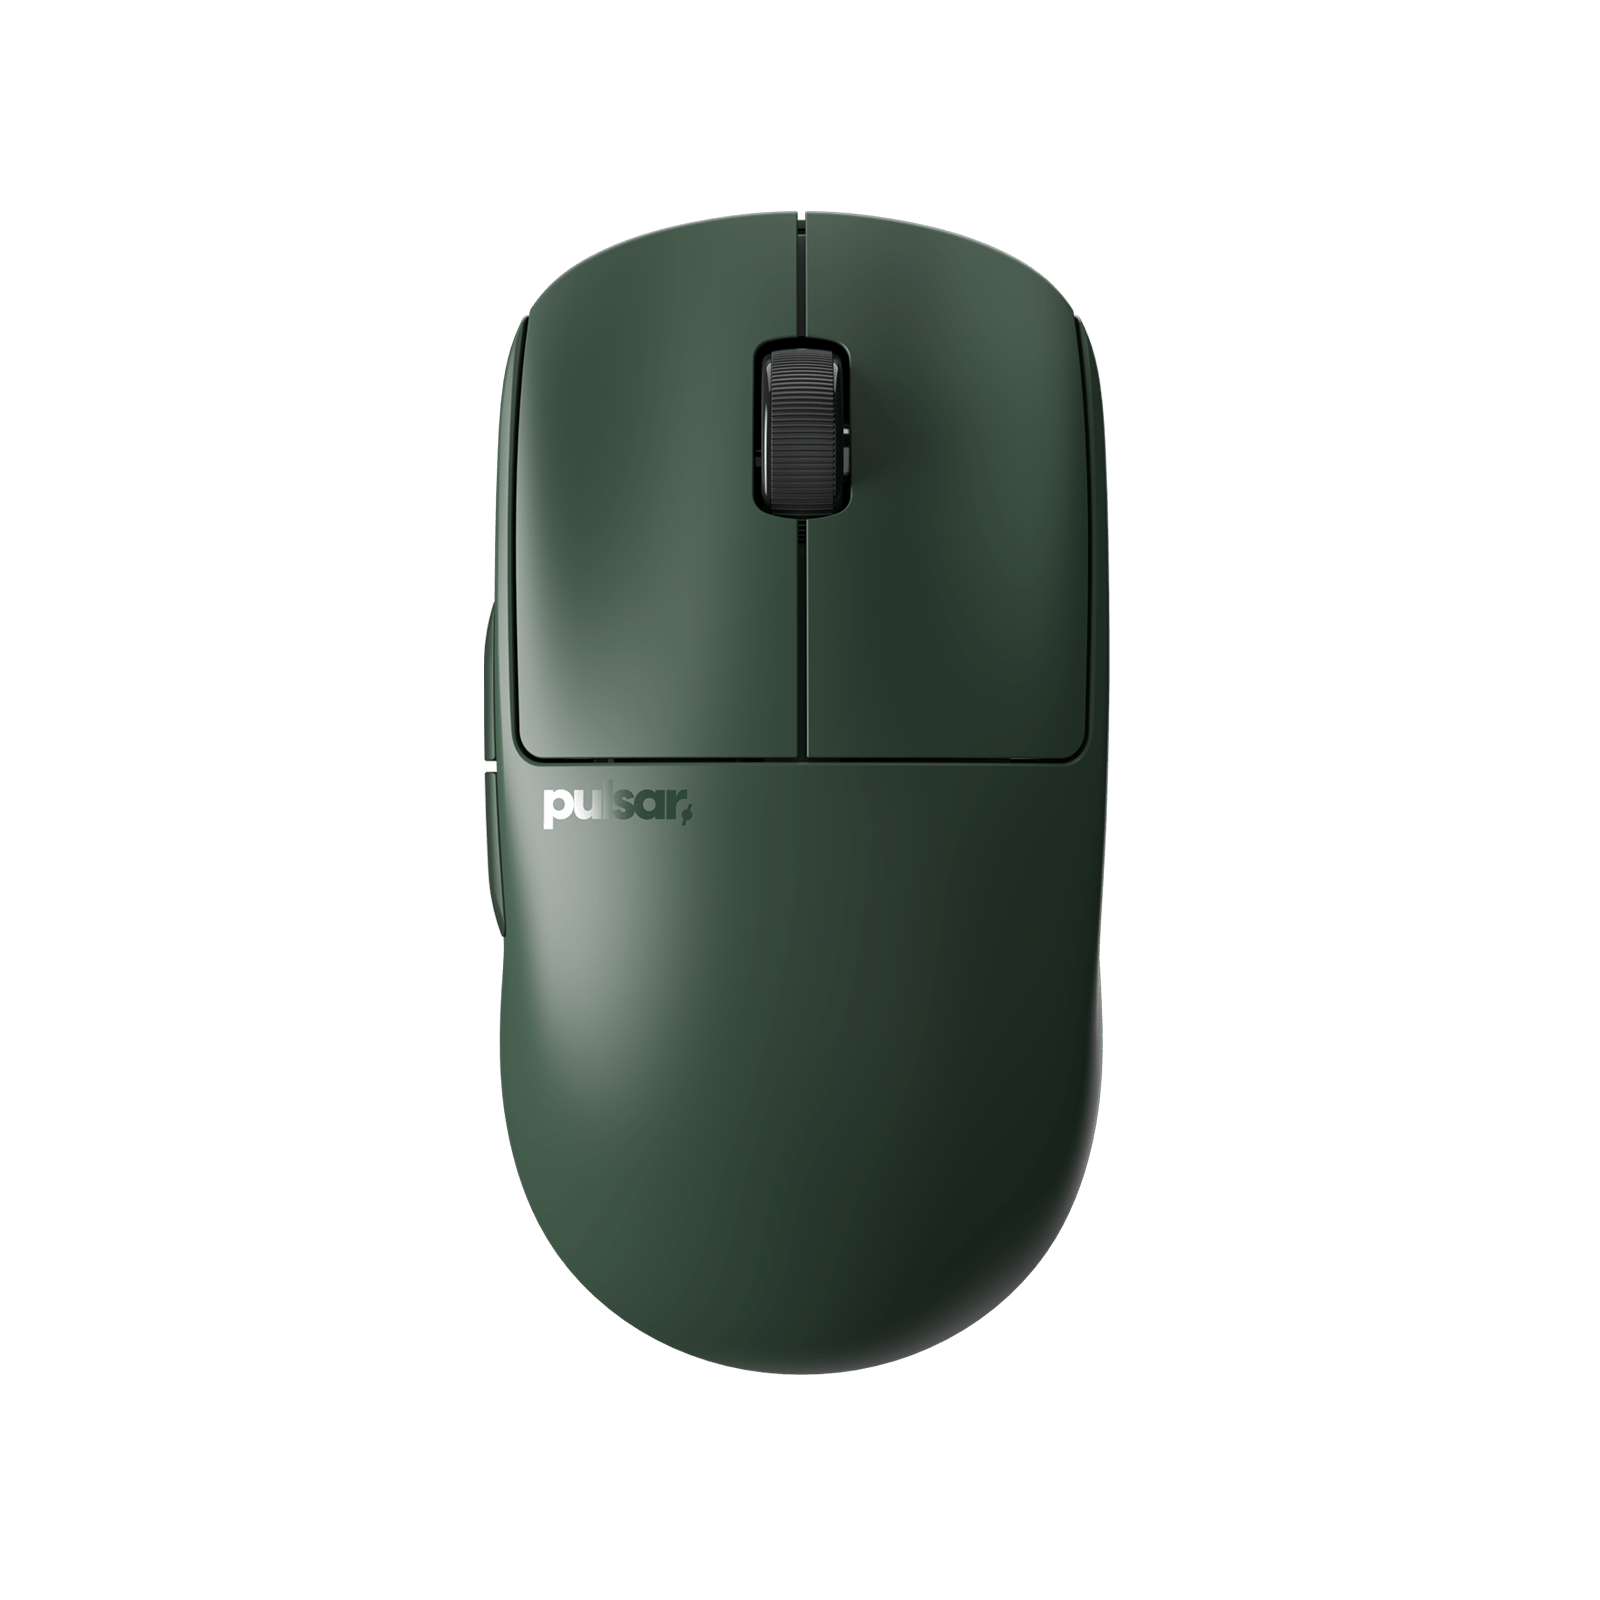 [Founder's Edition] X2V2 Gaming Mouse